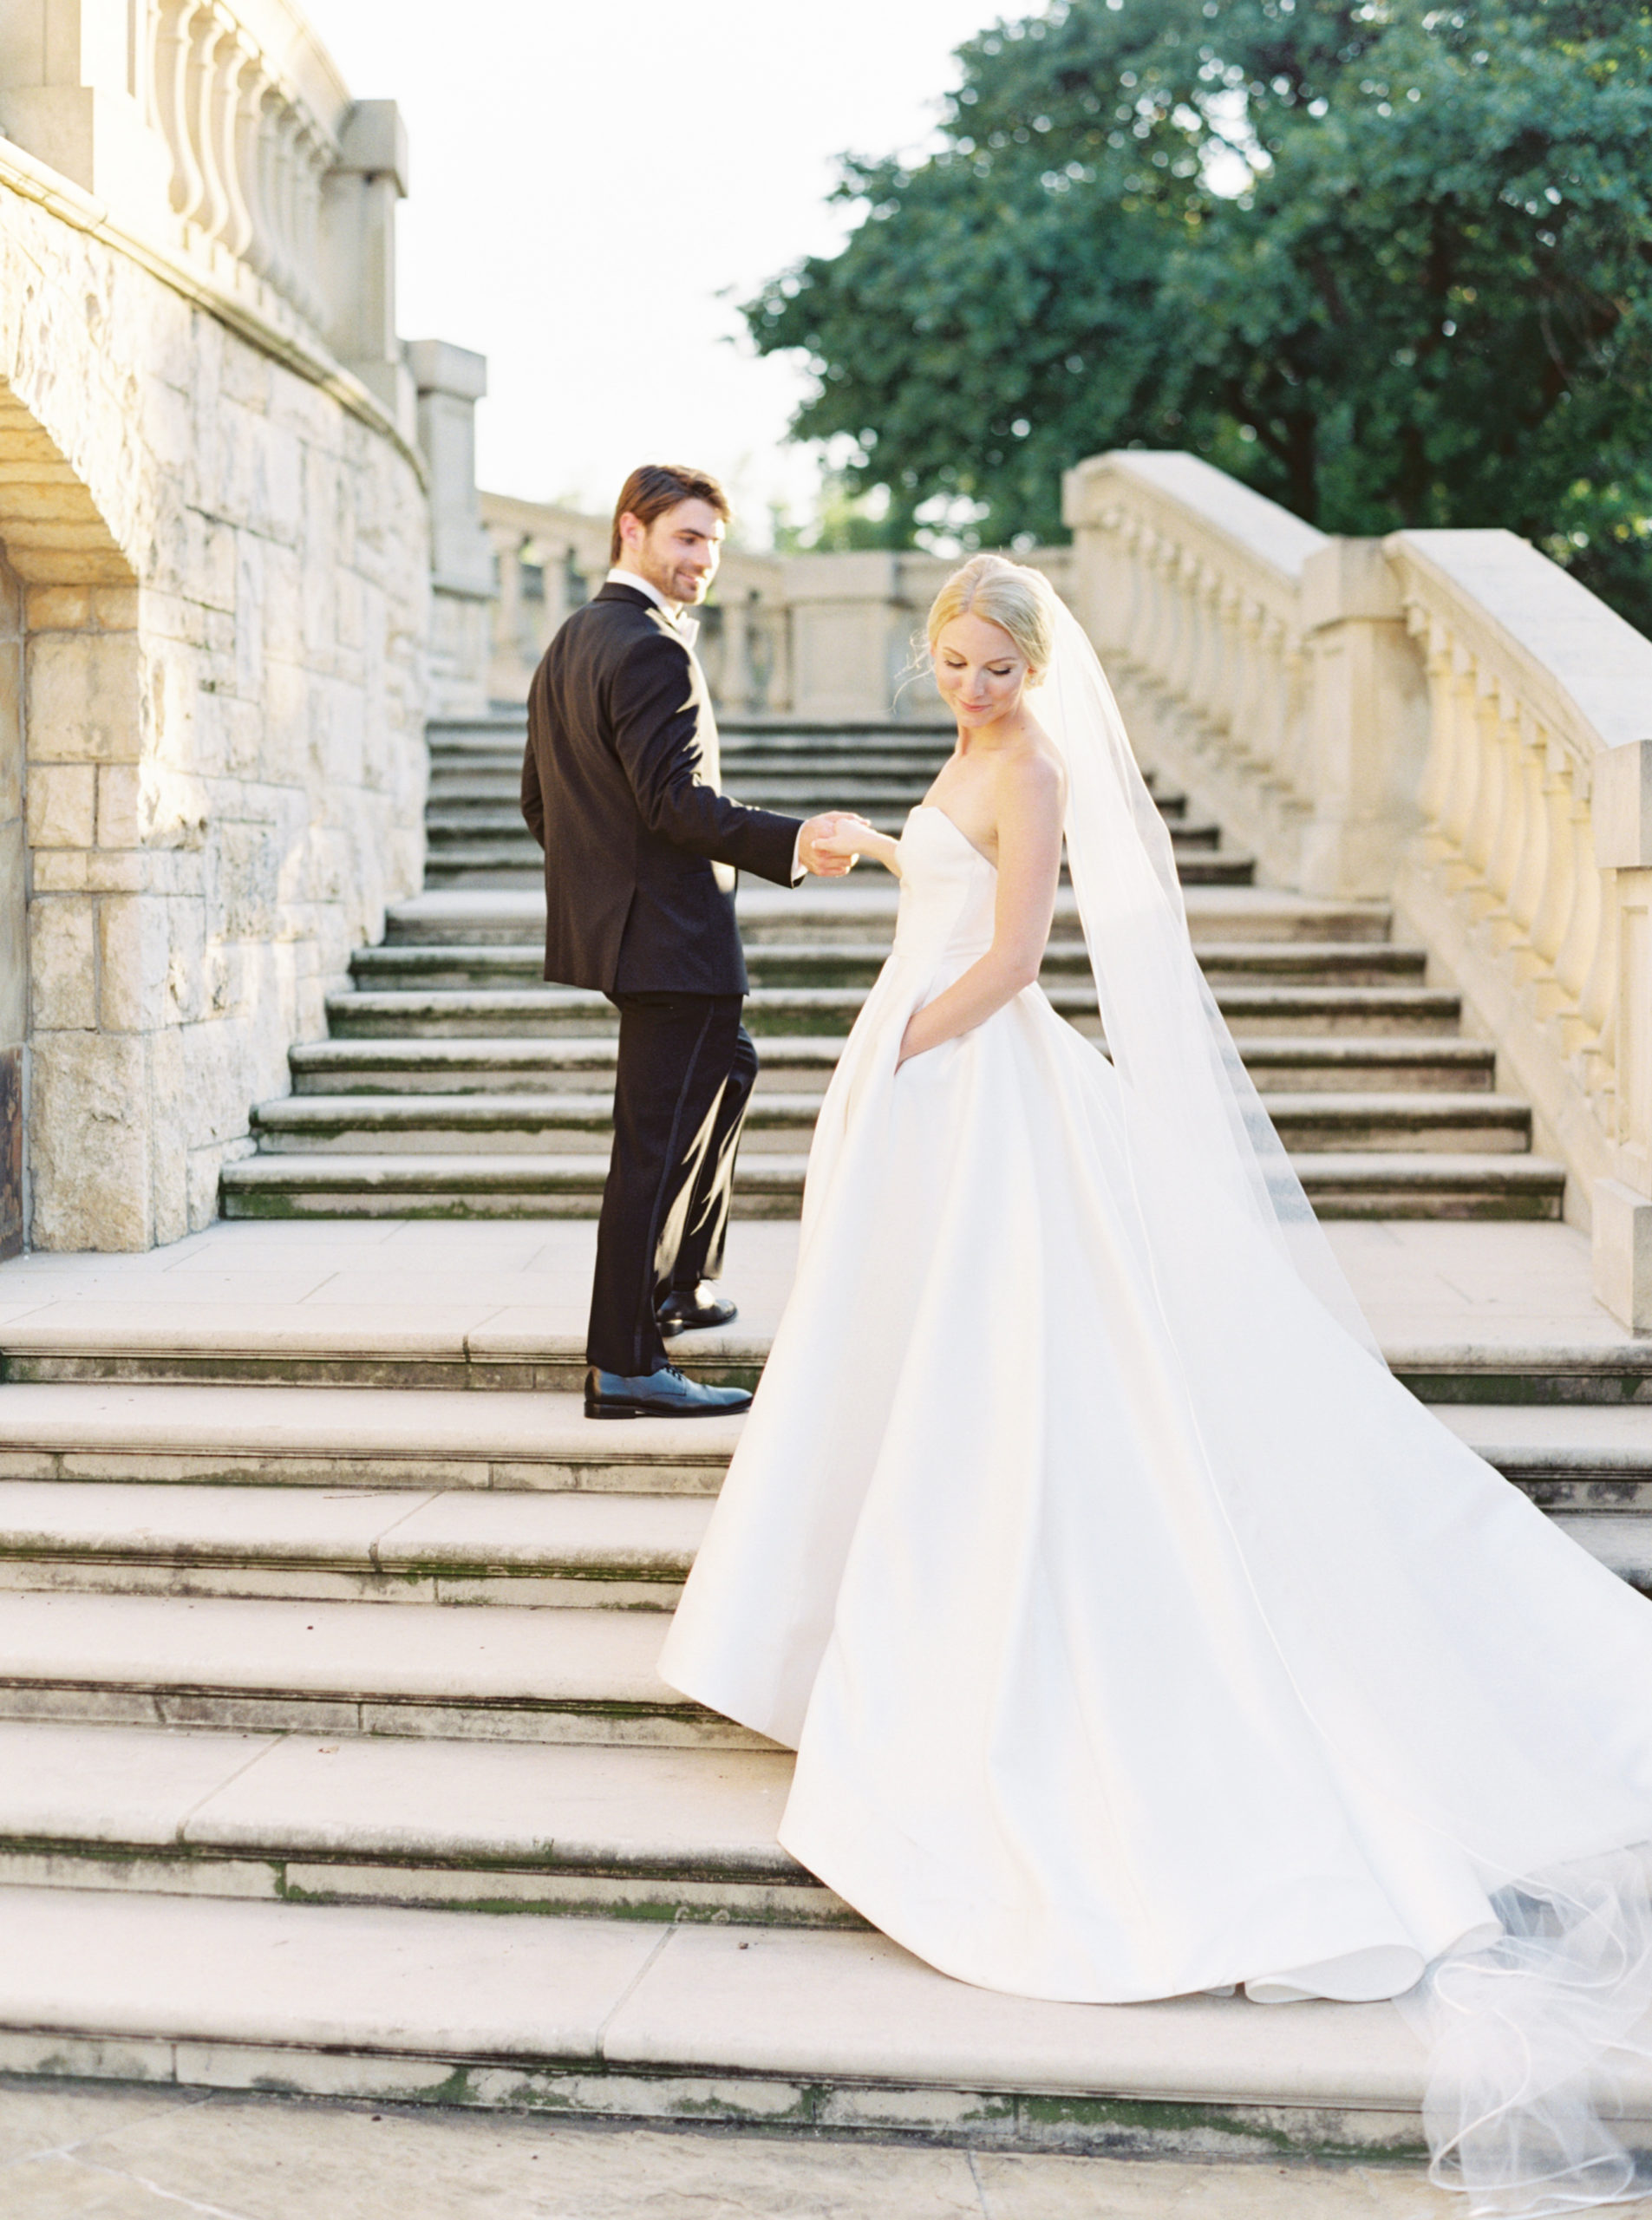 Bride and groom pose at the stairs at The Olana during their wedding shoot taken by Mackenzie Reiter